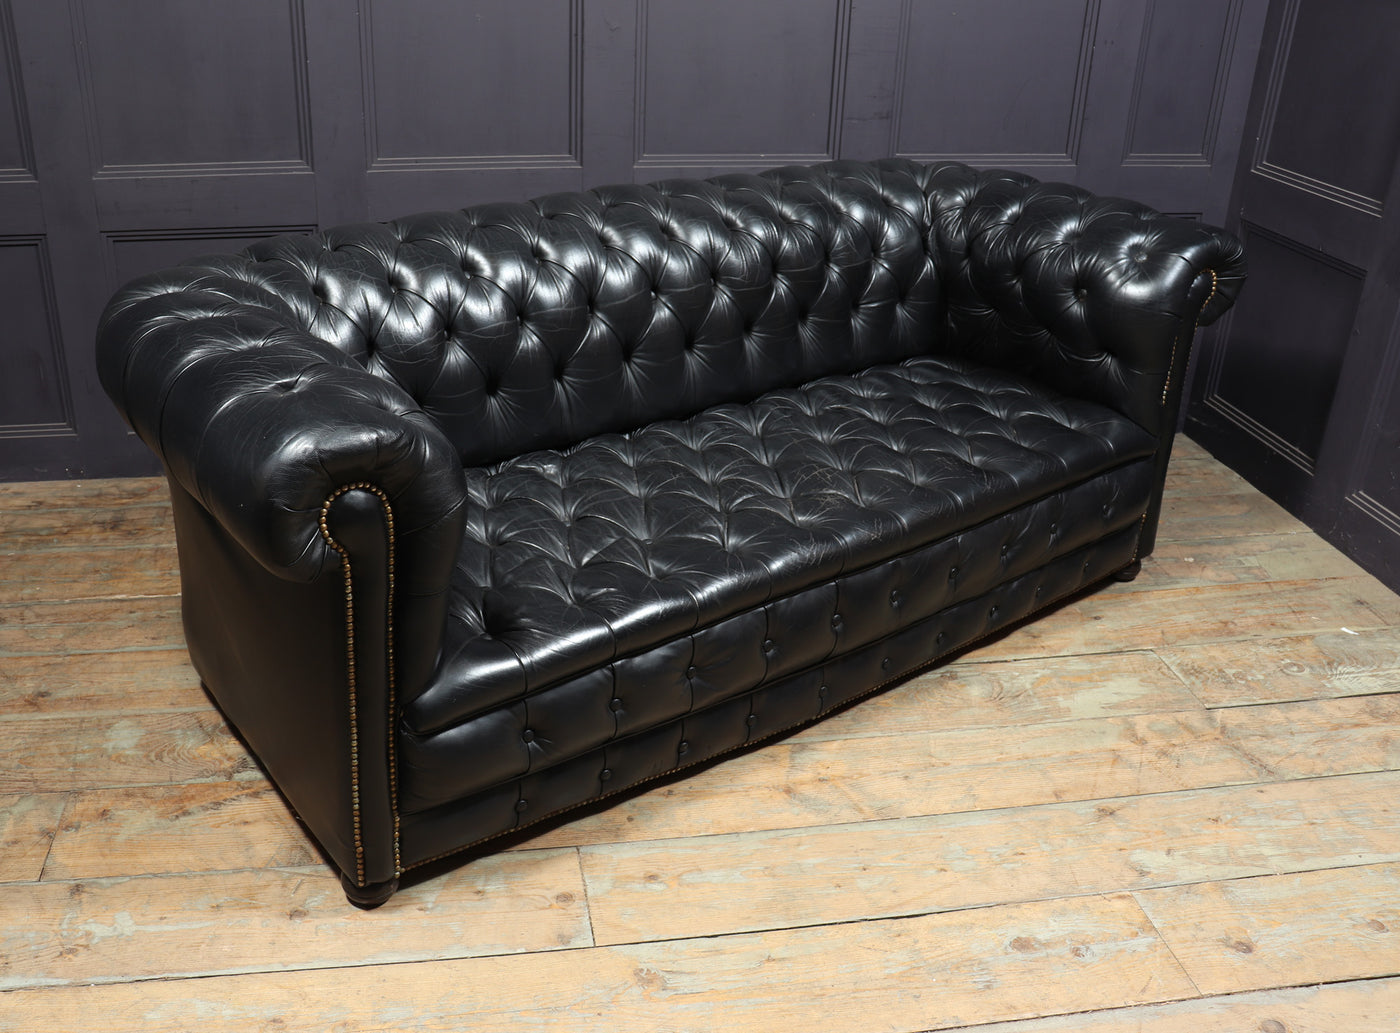 Vintage Black leather Chesterfield Sofa seat